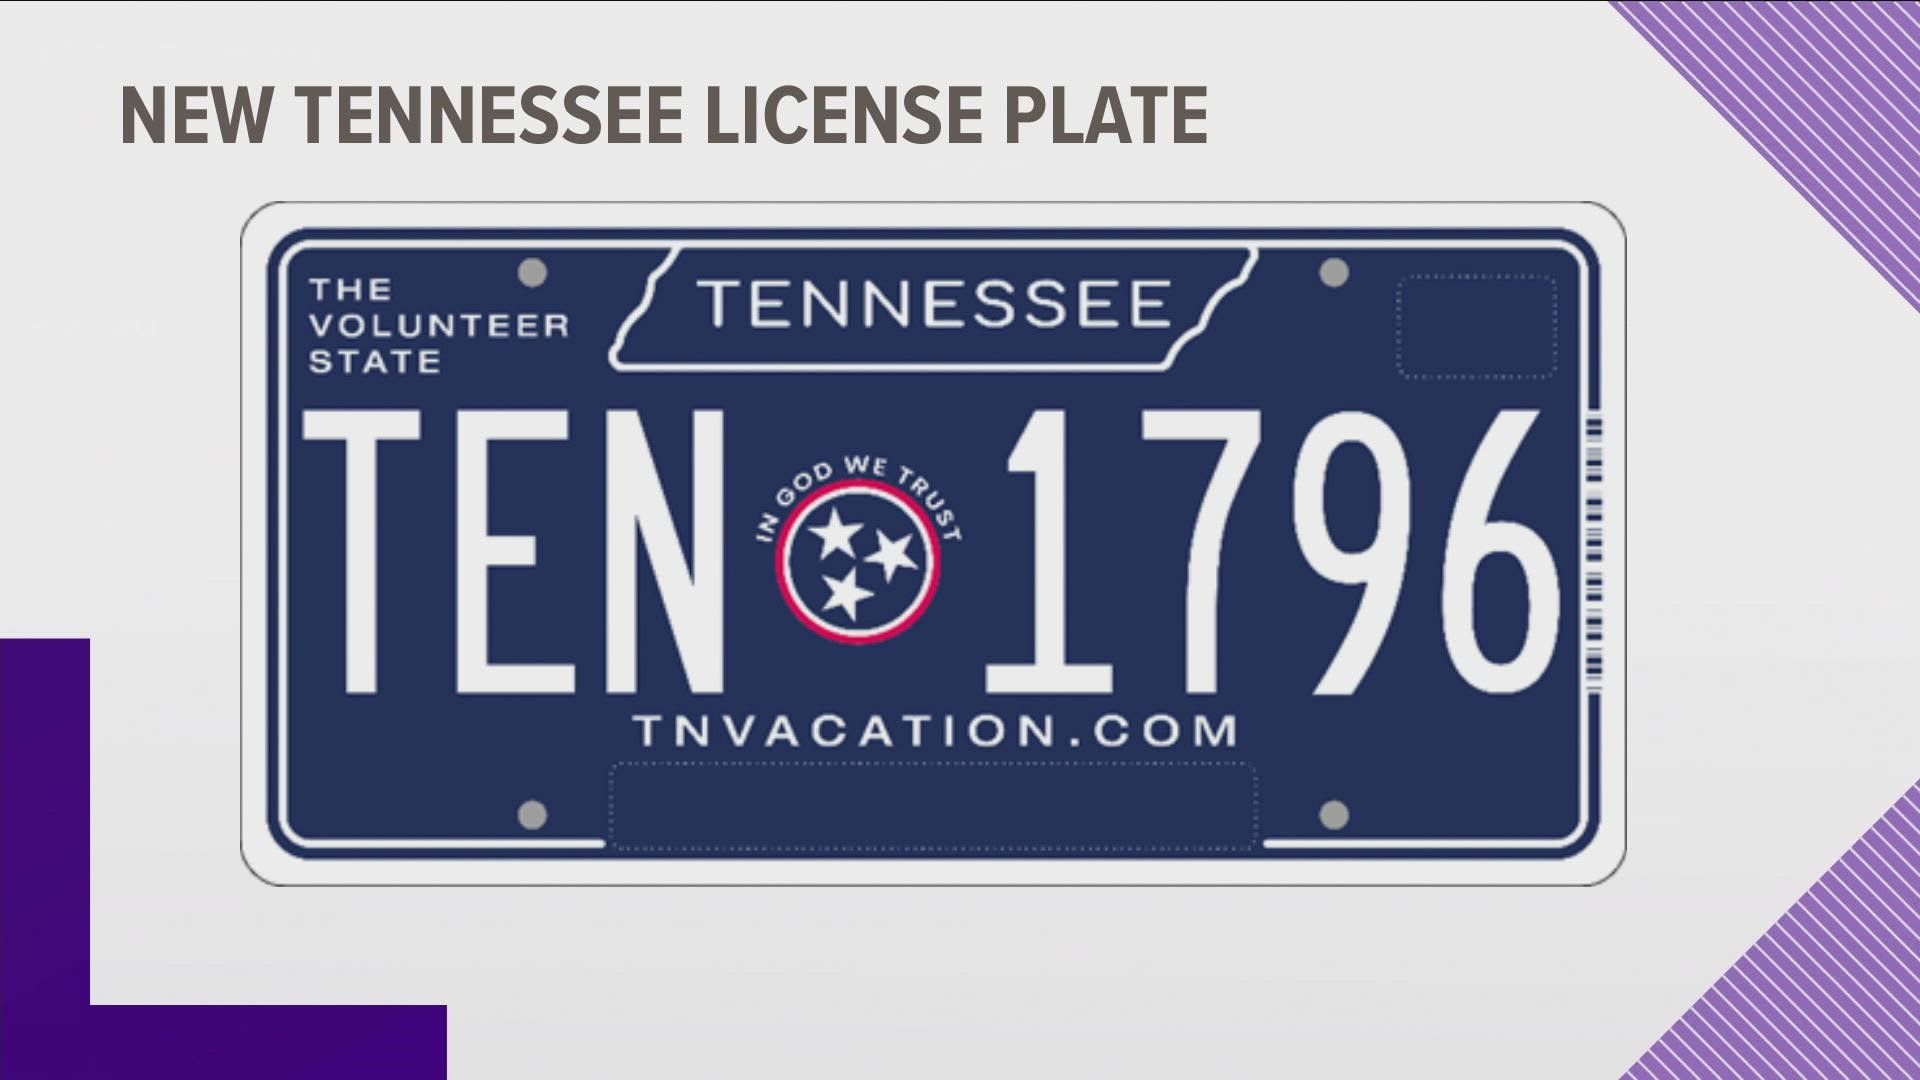 The state announced most people liked the blue license plate design with the state outline around the word "Tennessee."